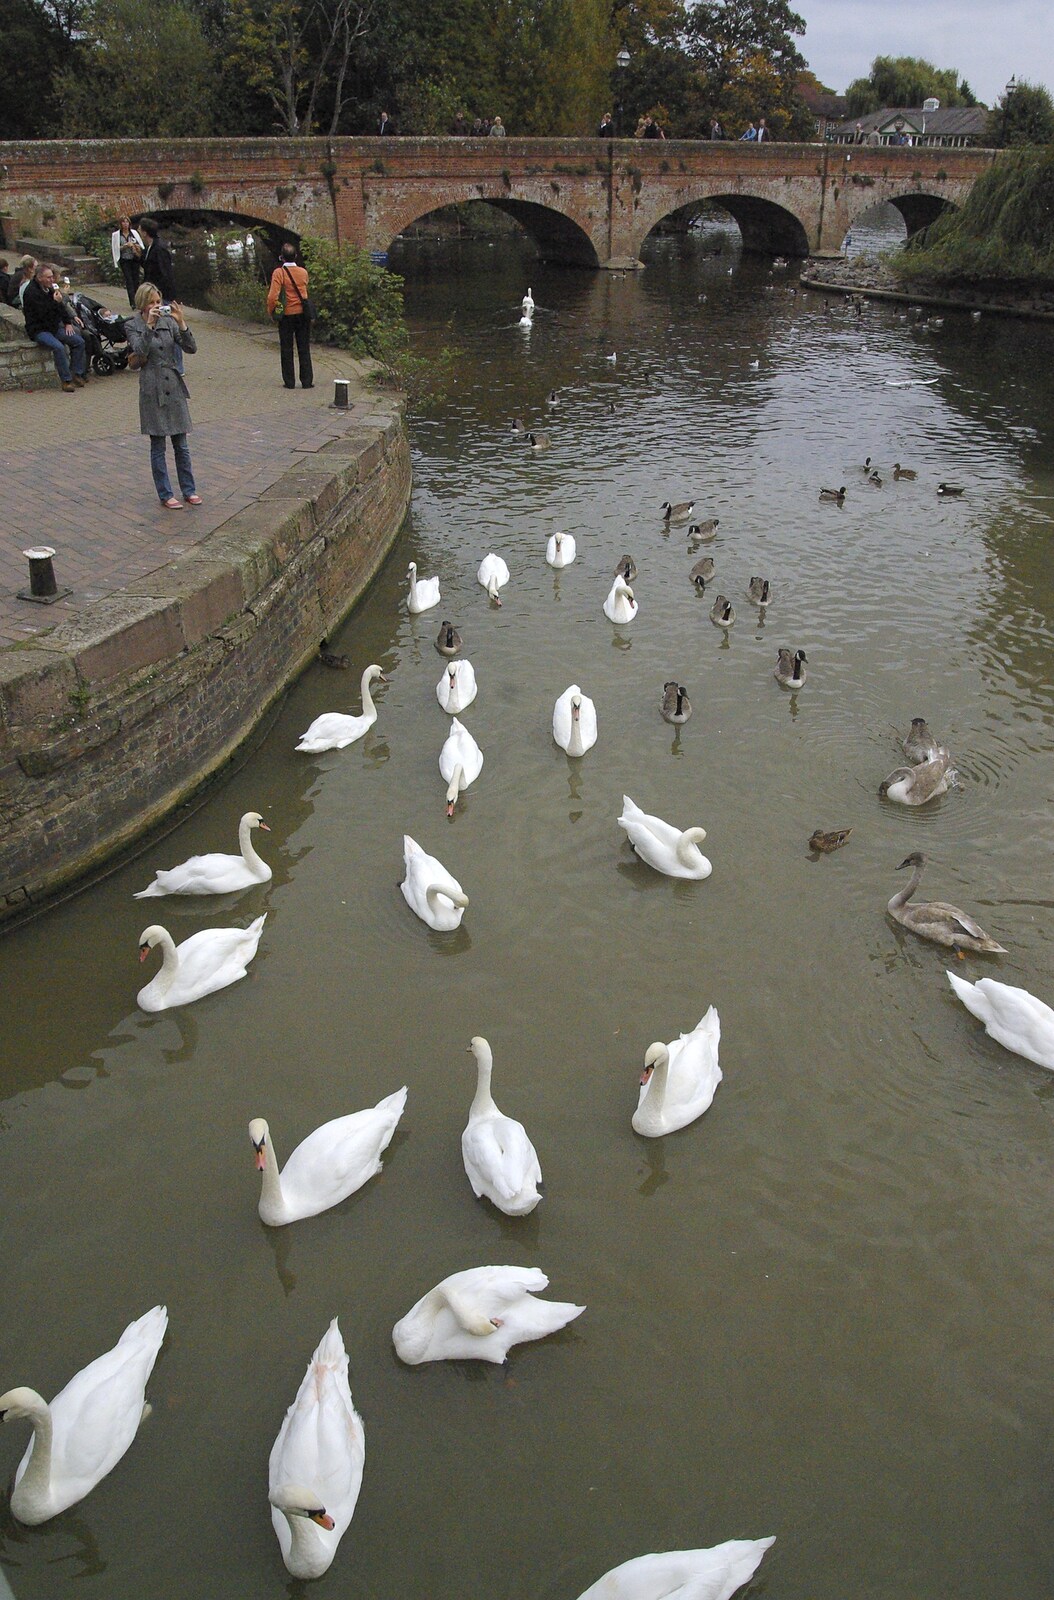 Matt's Wedding Reception, and a BSCC Presentation, Brome, Solihull and Stratford upon Avon - 6th October 2007: Many swans on the river